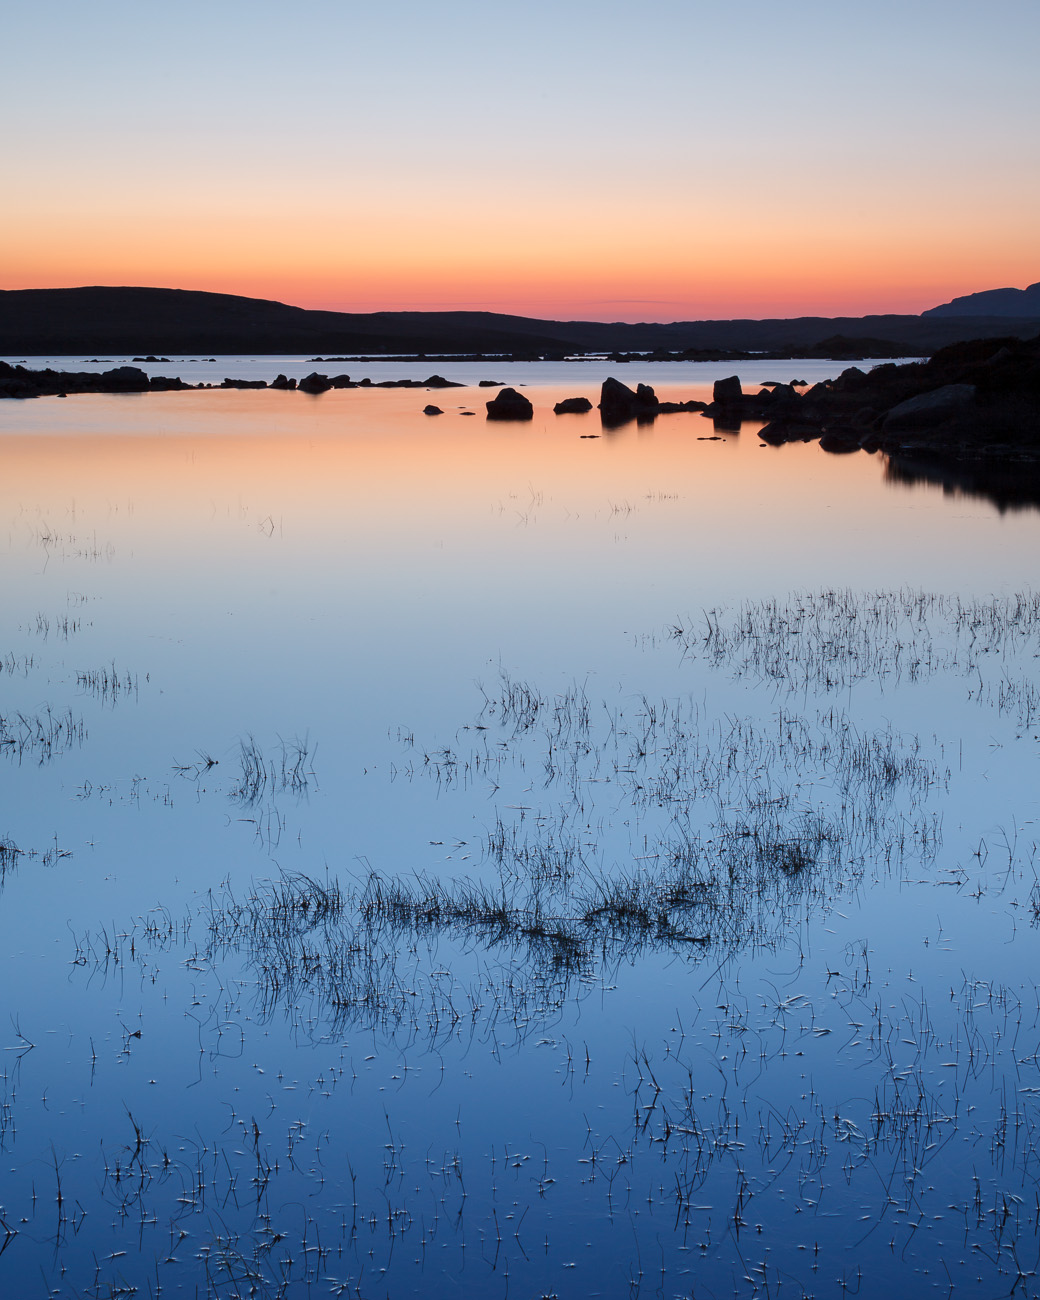 Sunrise at an isolated lochan